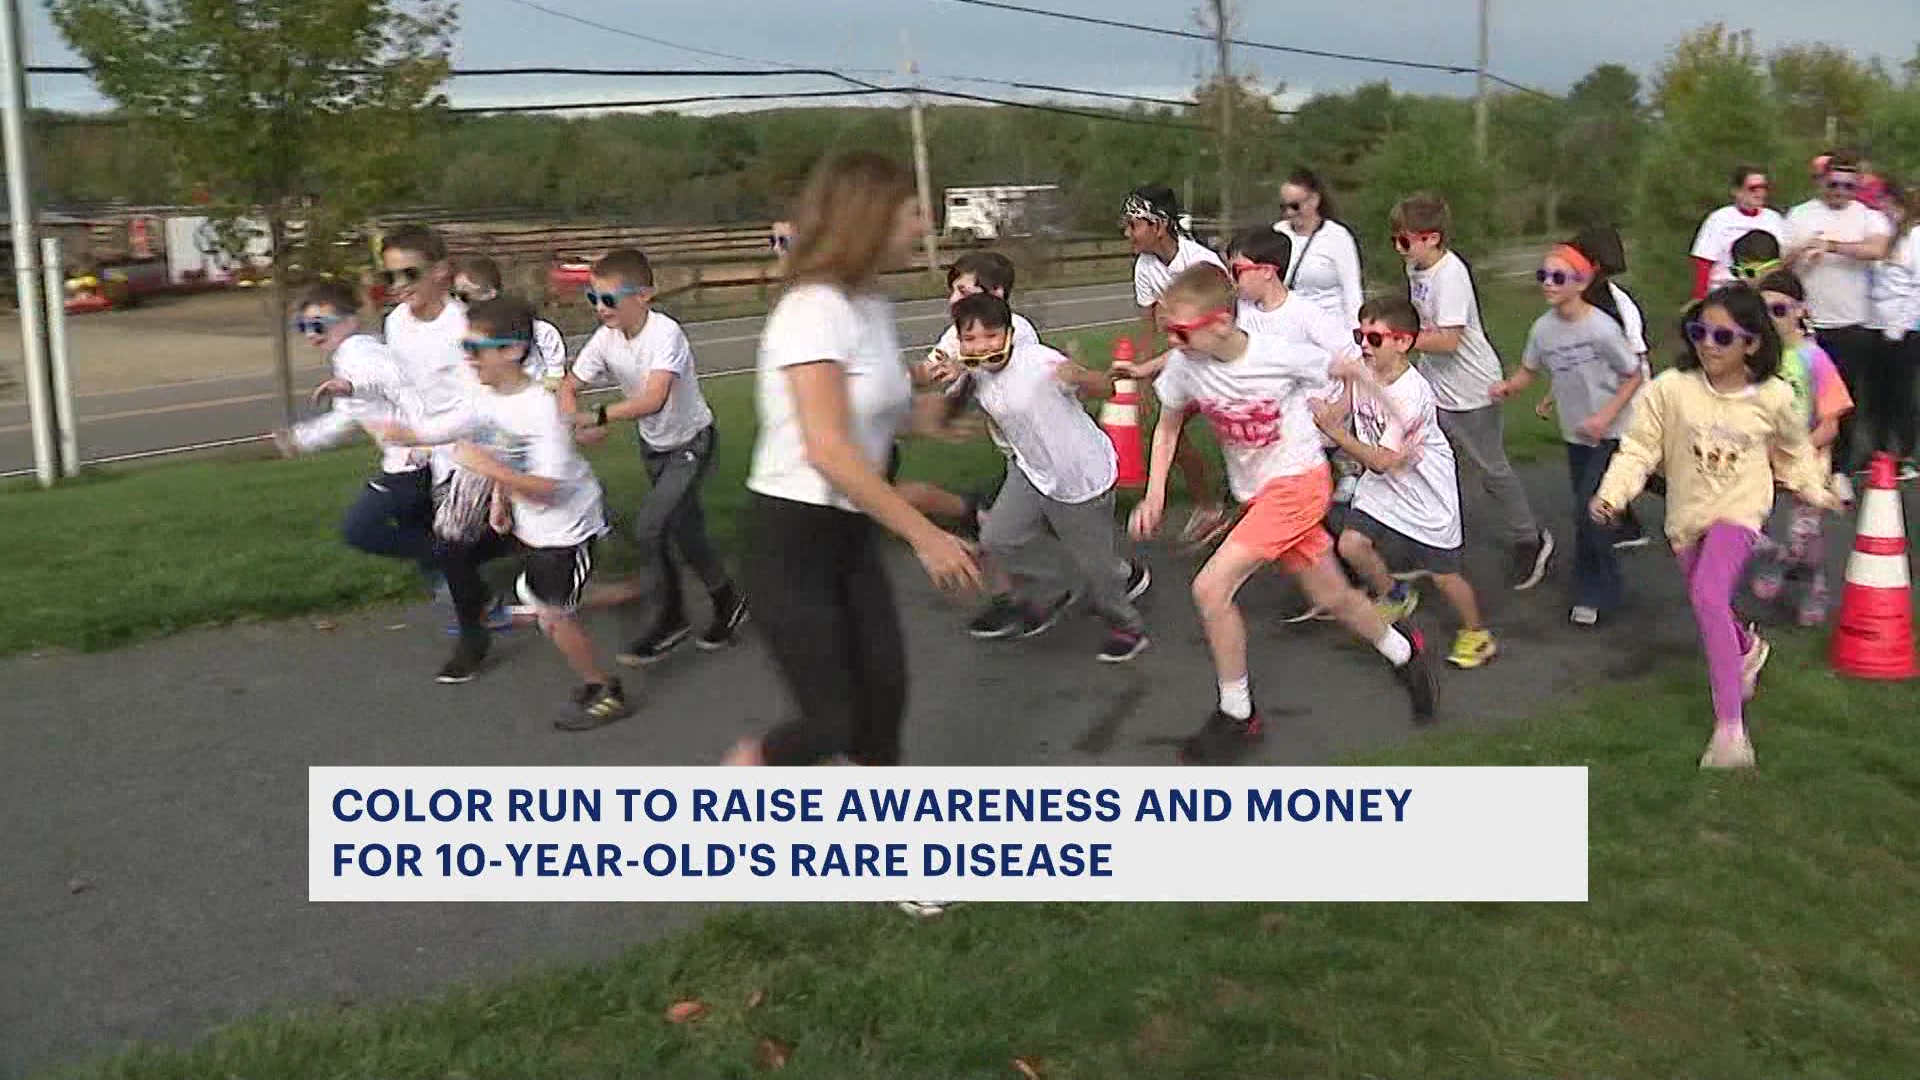 Boy diagnosed with rare disease organized 'Color Run' to benefit others with same diagnosis